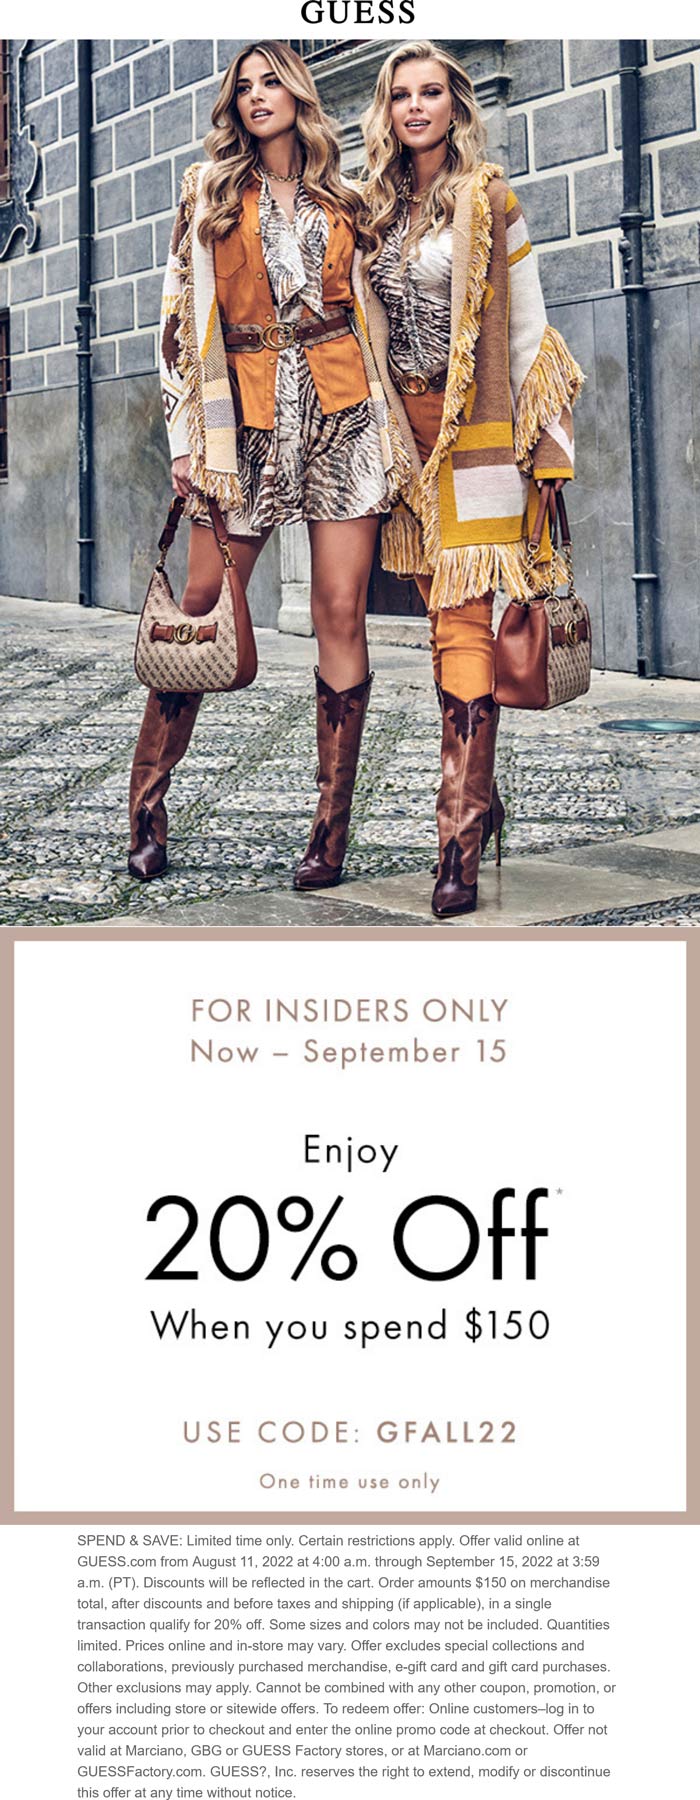 GUESS stores Coupon  20% off $150 online at GUESS via promo code GFALL22 #guess 